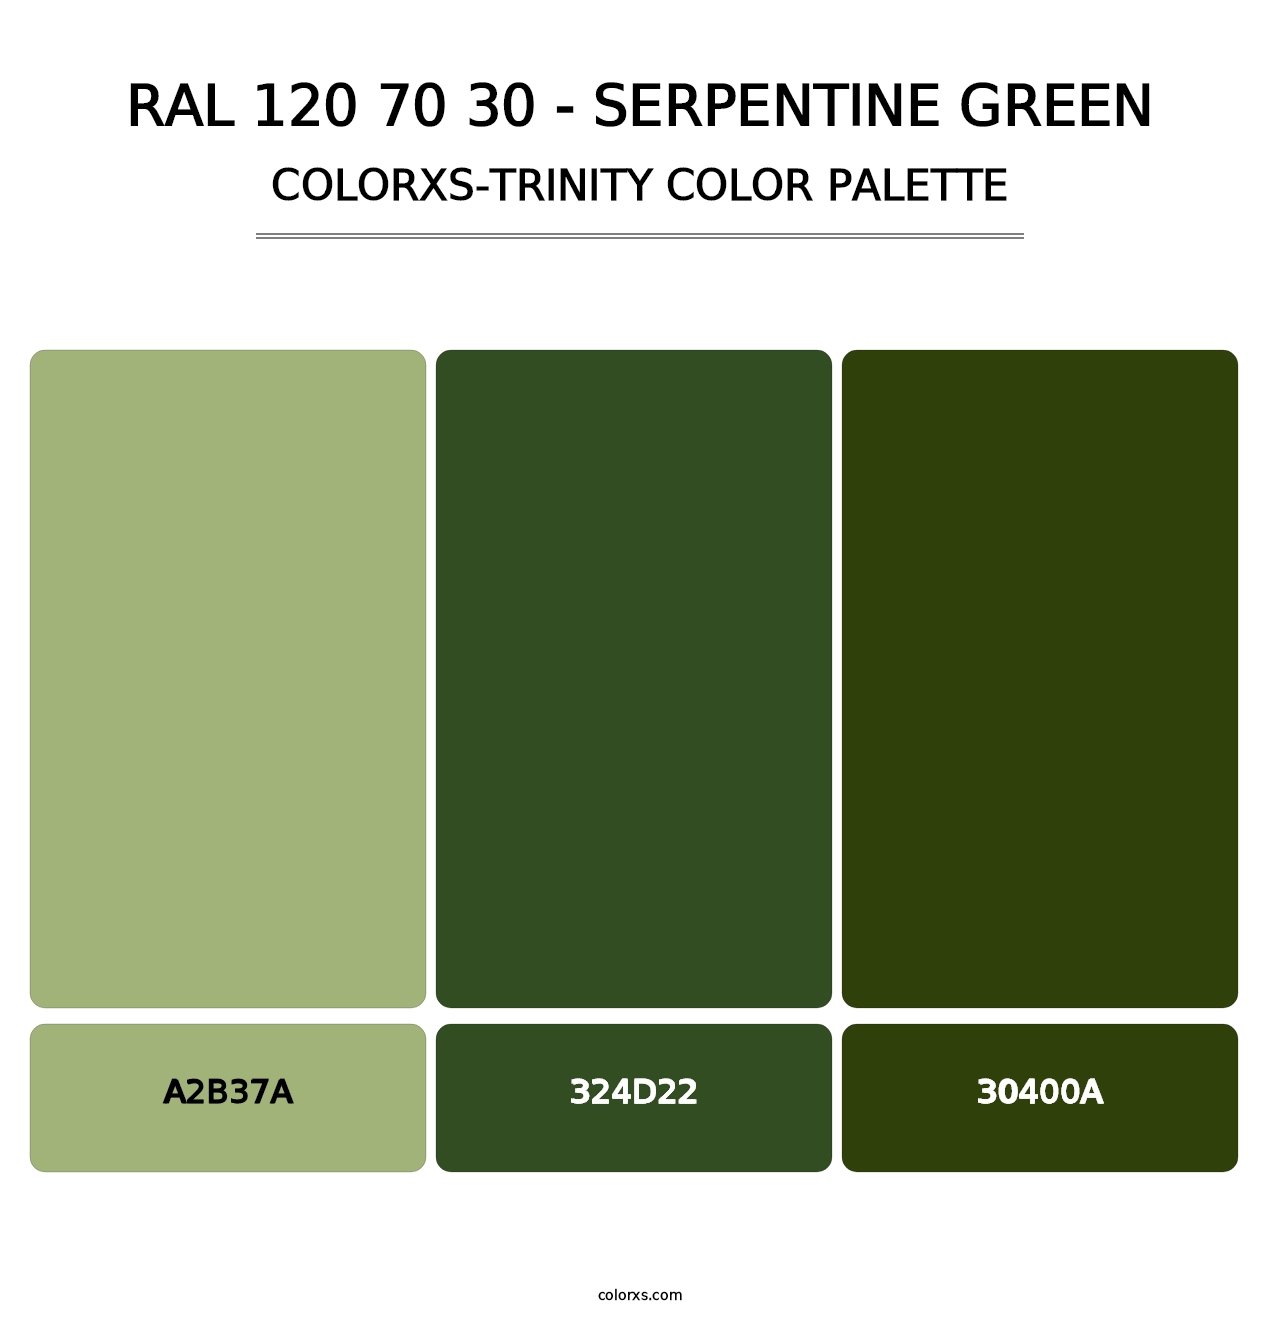 RAL 120 70 30 - Serpentine Green - Colorxs Trinity Palette